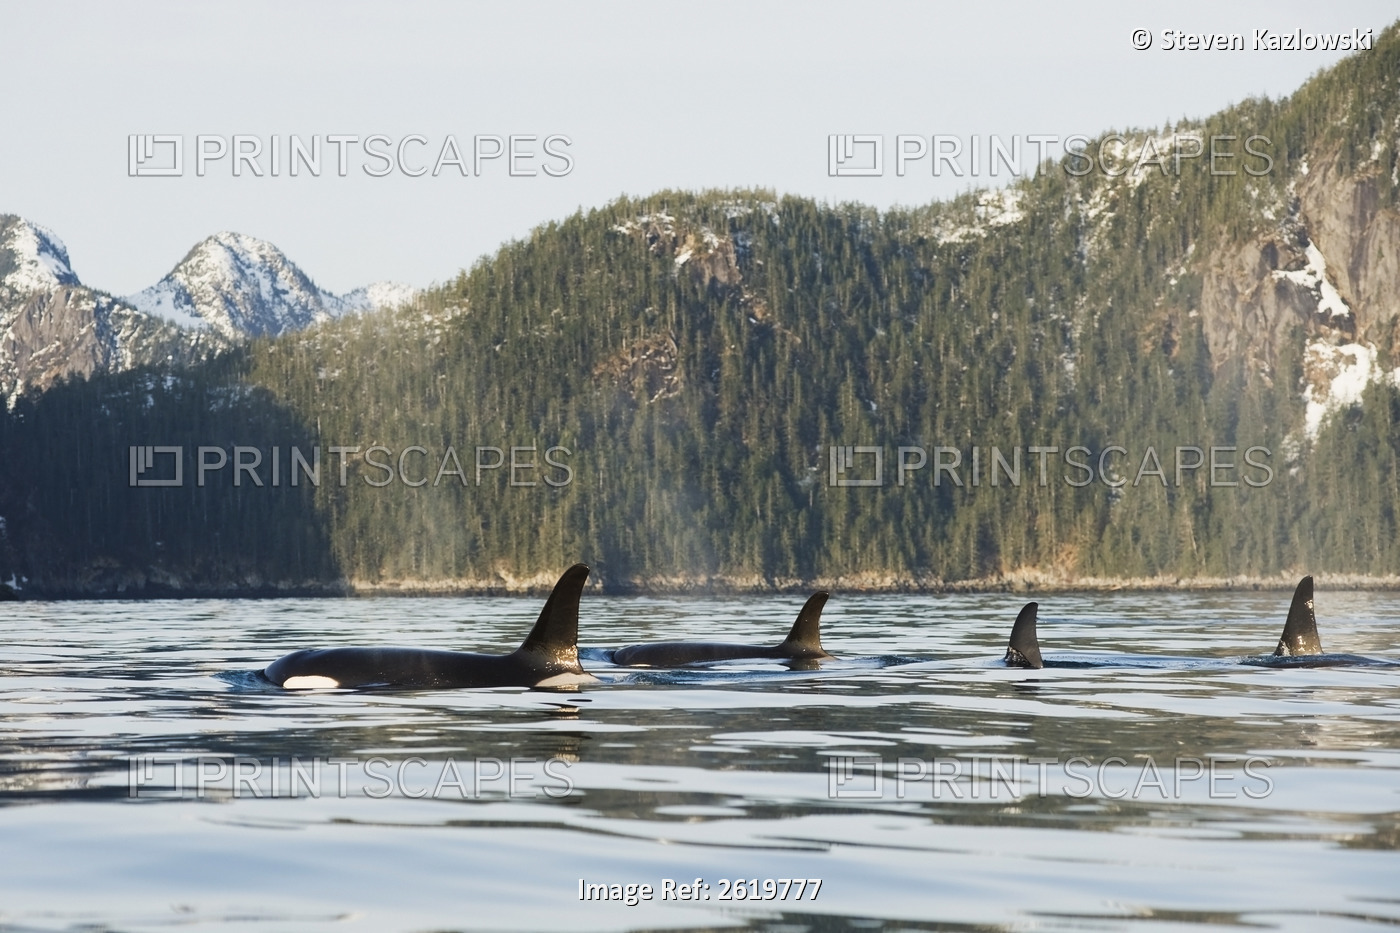 Killer Whale, Or Orcas, Orcinus Orca, Pod In Traveling In Resurrection Bay, ...